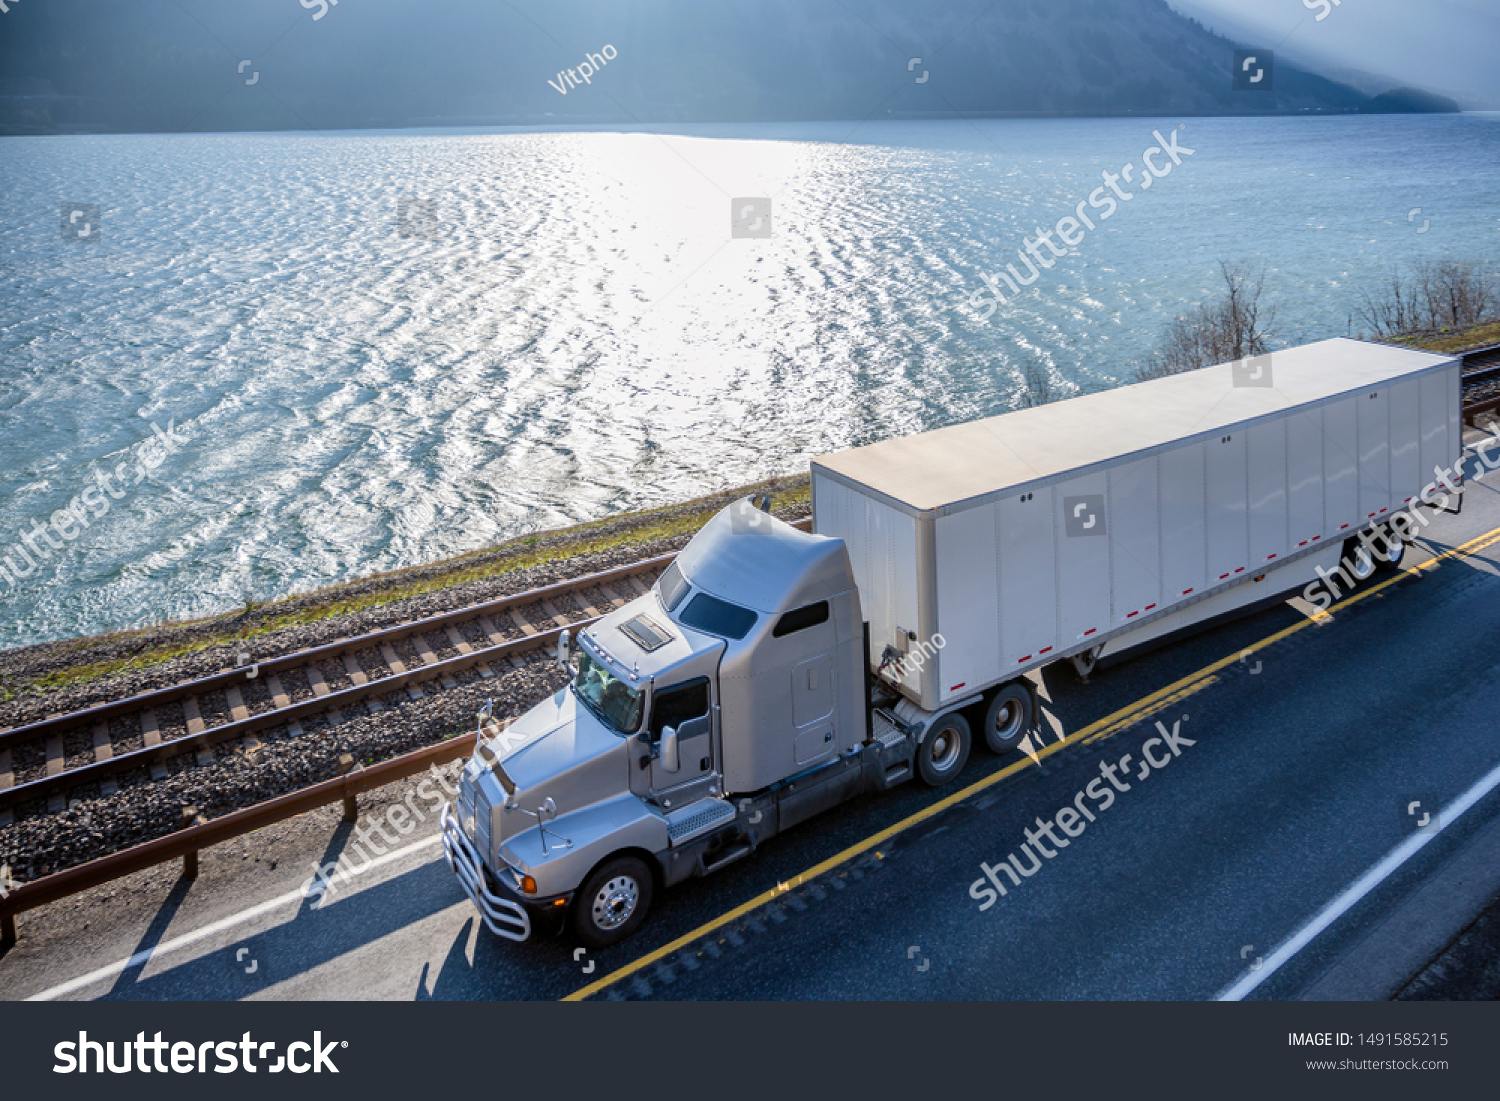 Big rig classic American powerful gray semi truck with dry van semi trailer transporting commercial cargo running on the road along railroad and river in Columbia Gorge area with mountain ranges #1491585215